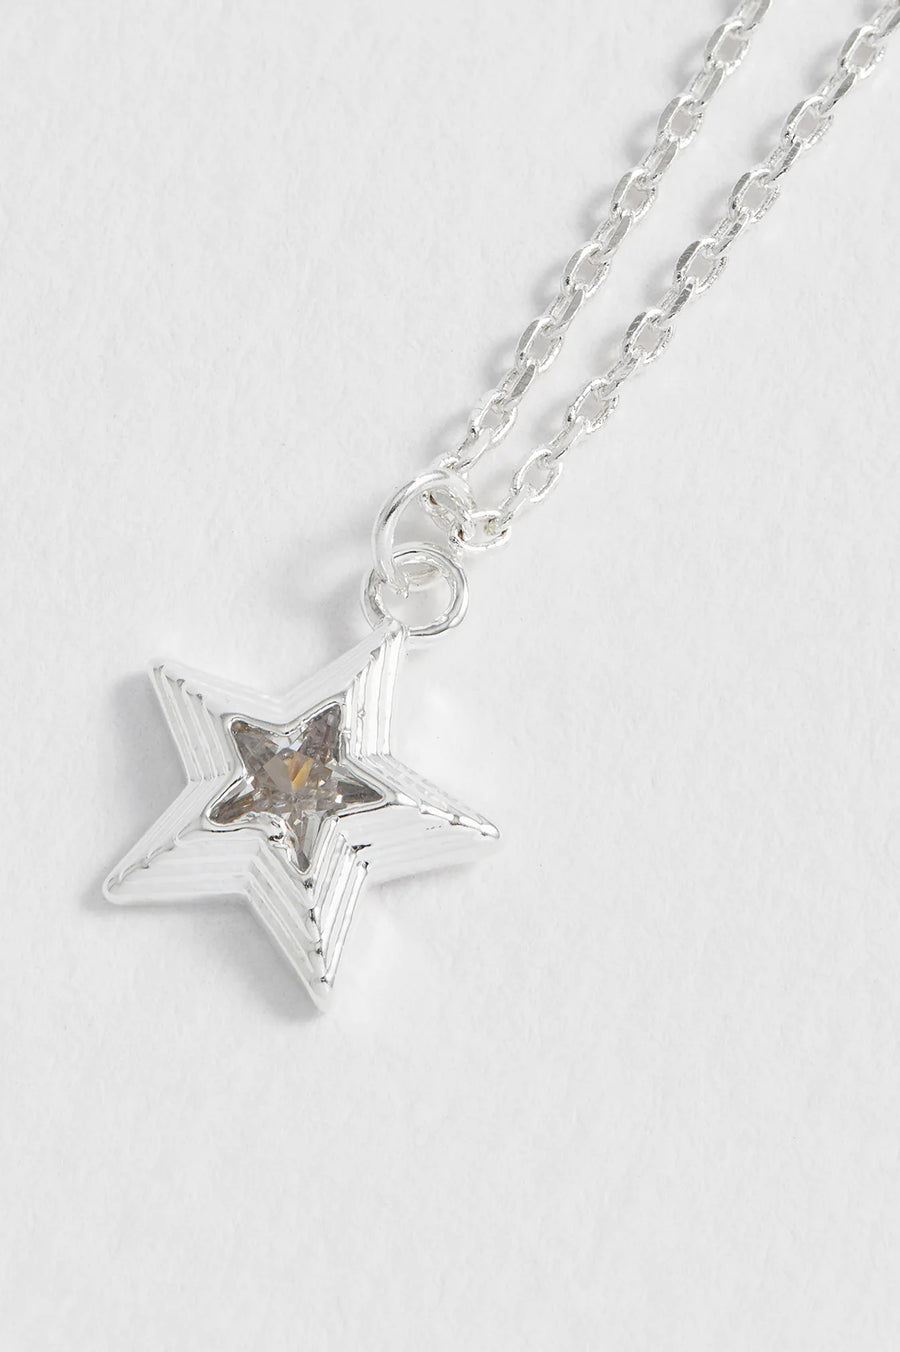 Blue Star Necklace - Silver Plated